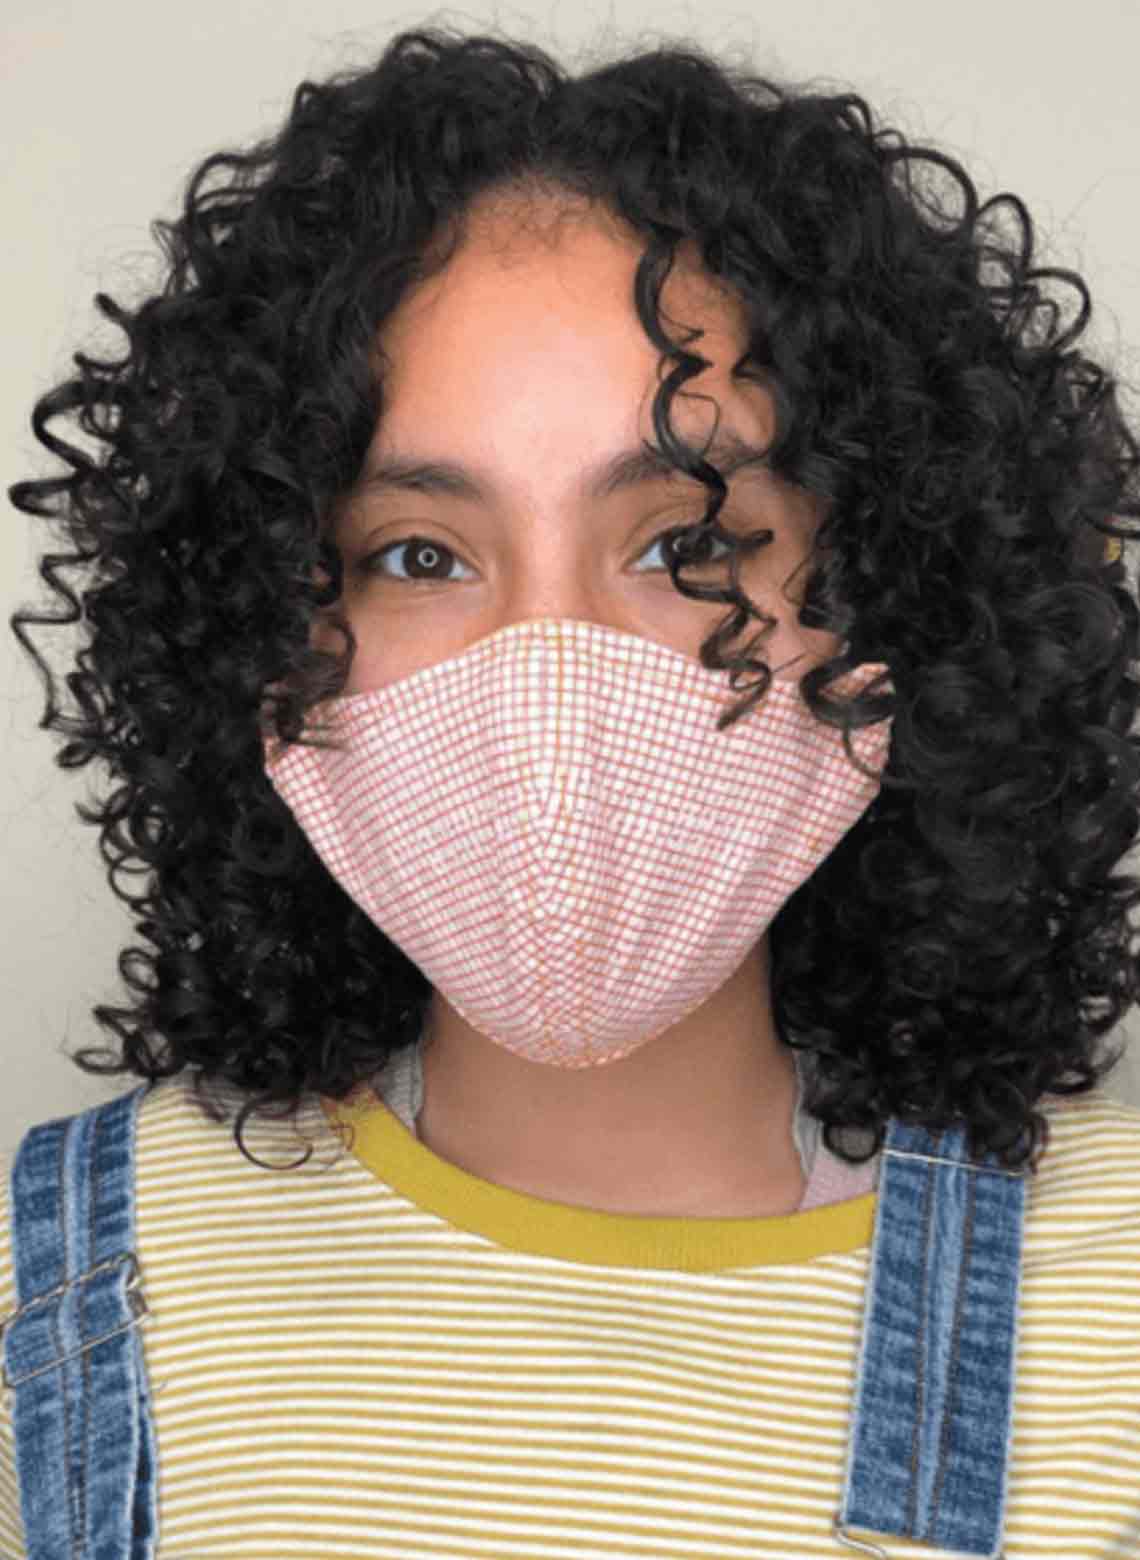 person wearing yellow striped shirt, denim overalls, plaid mask, and shoulder length black curly hair